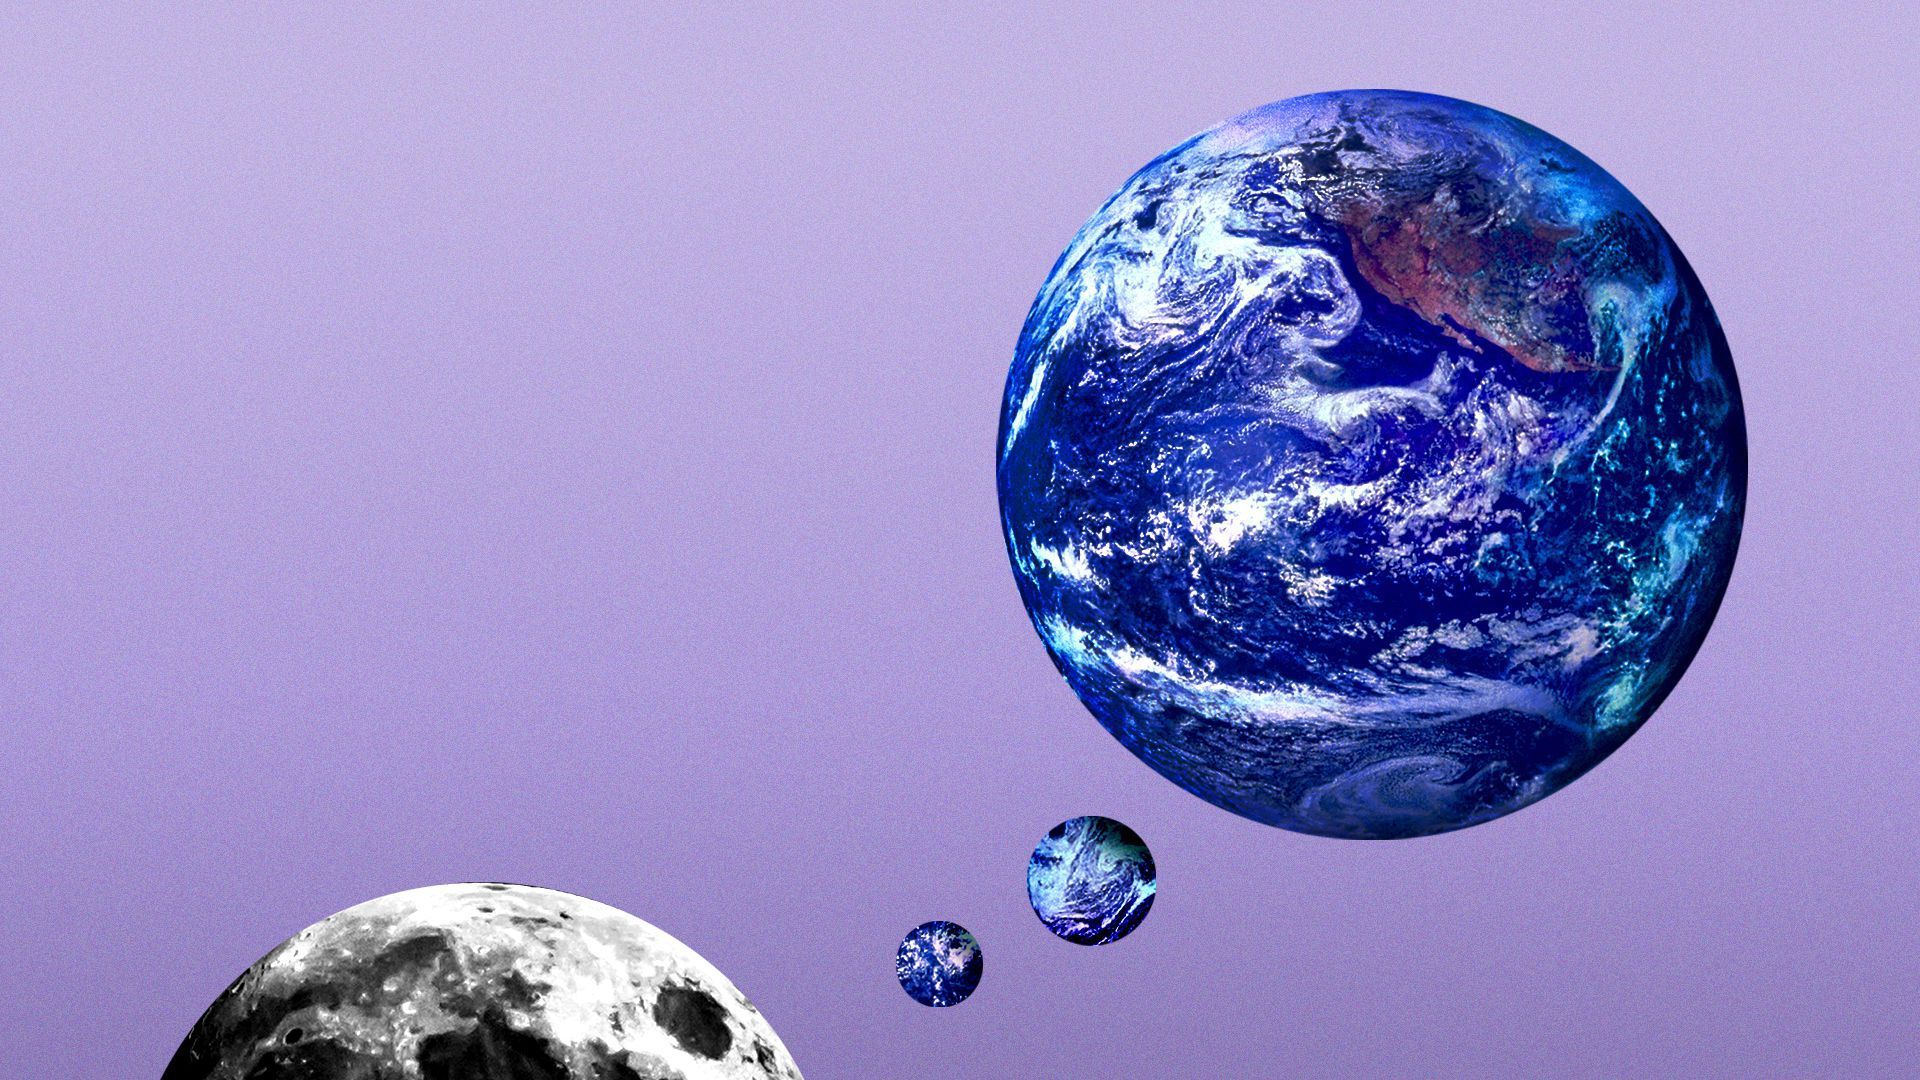 Illustration of moon and earth as thought bubble